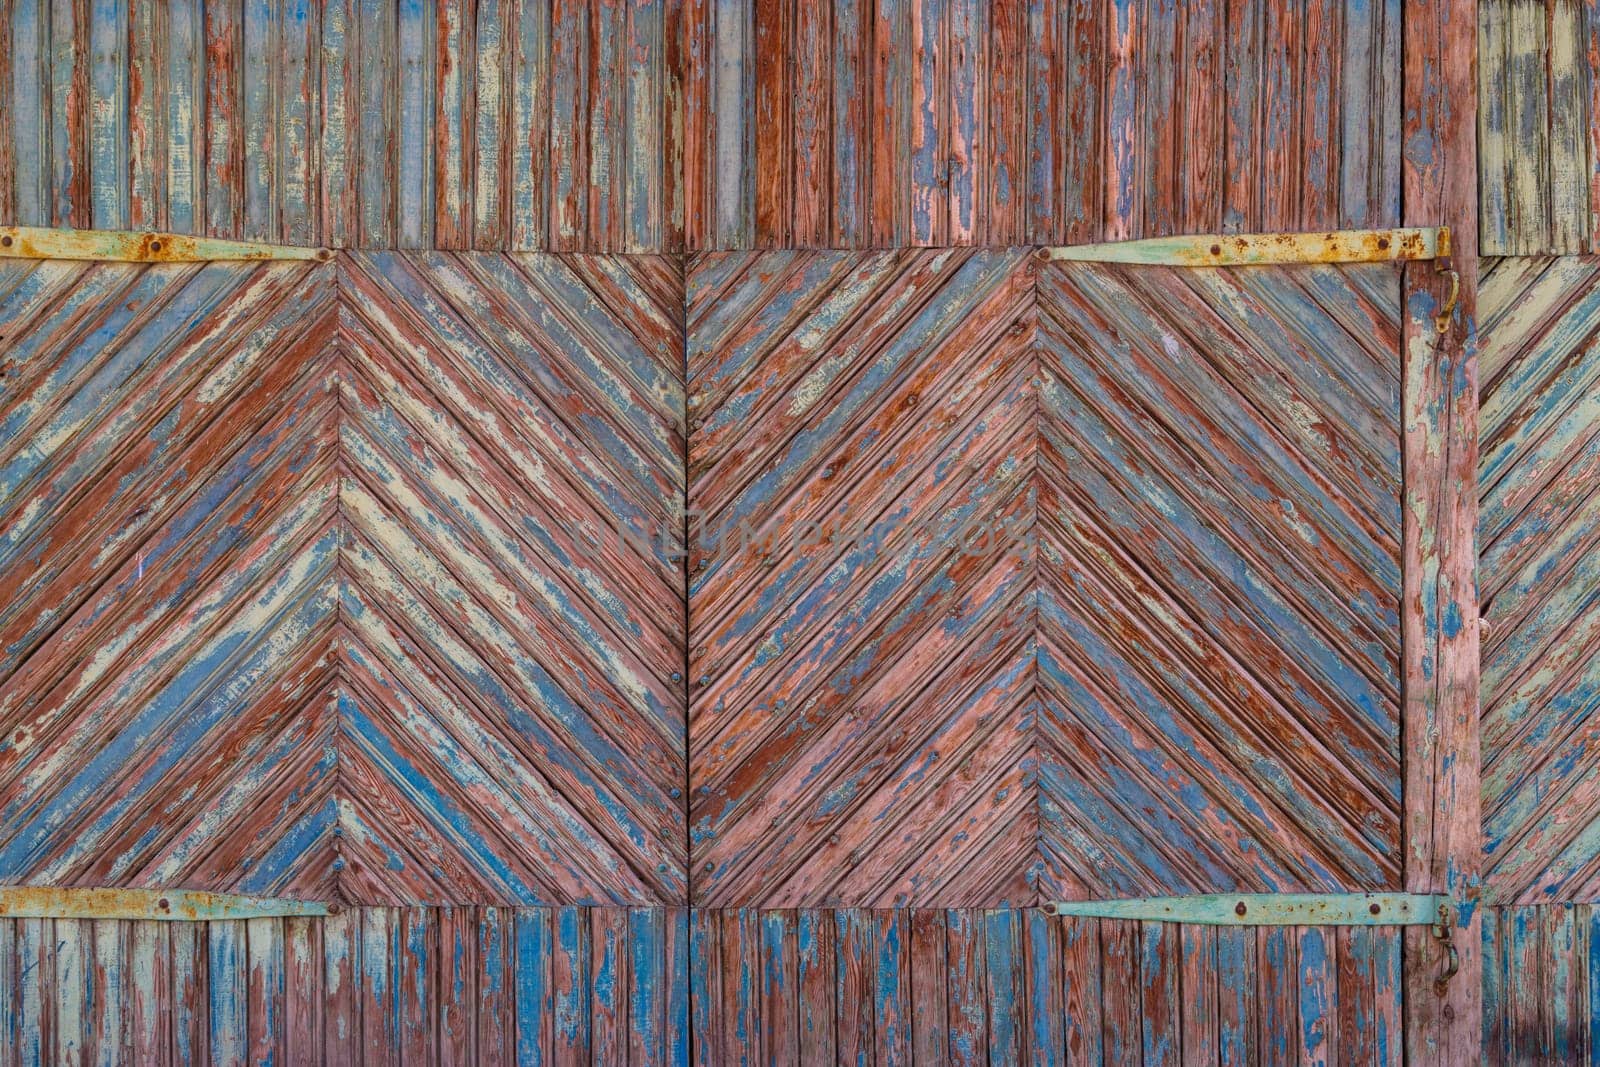 old wooden planks gate texture with peeled brown and blue paint layers under sun-bleached blue paint layer by z1b